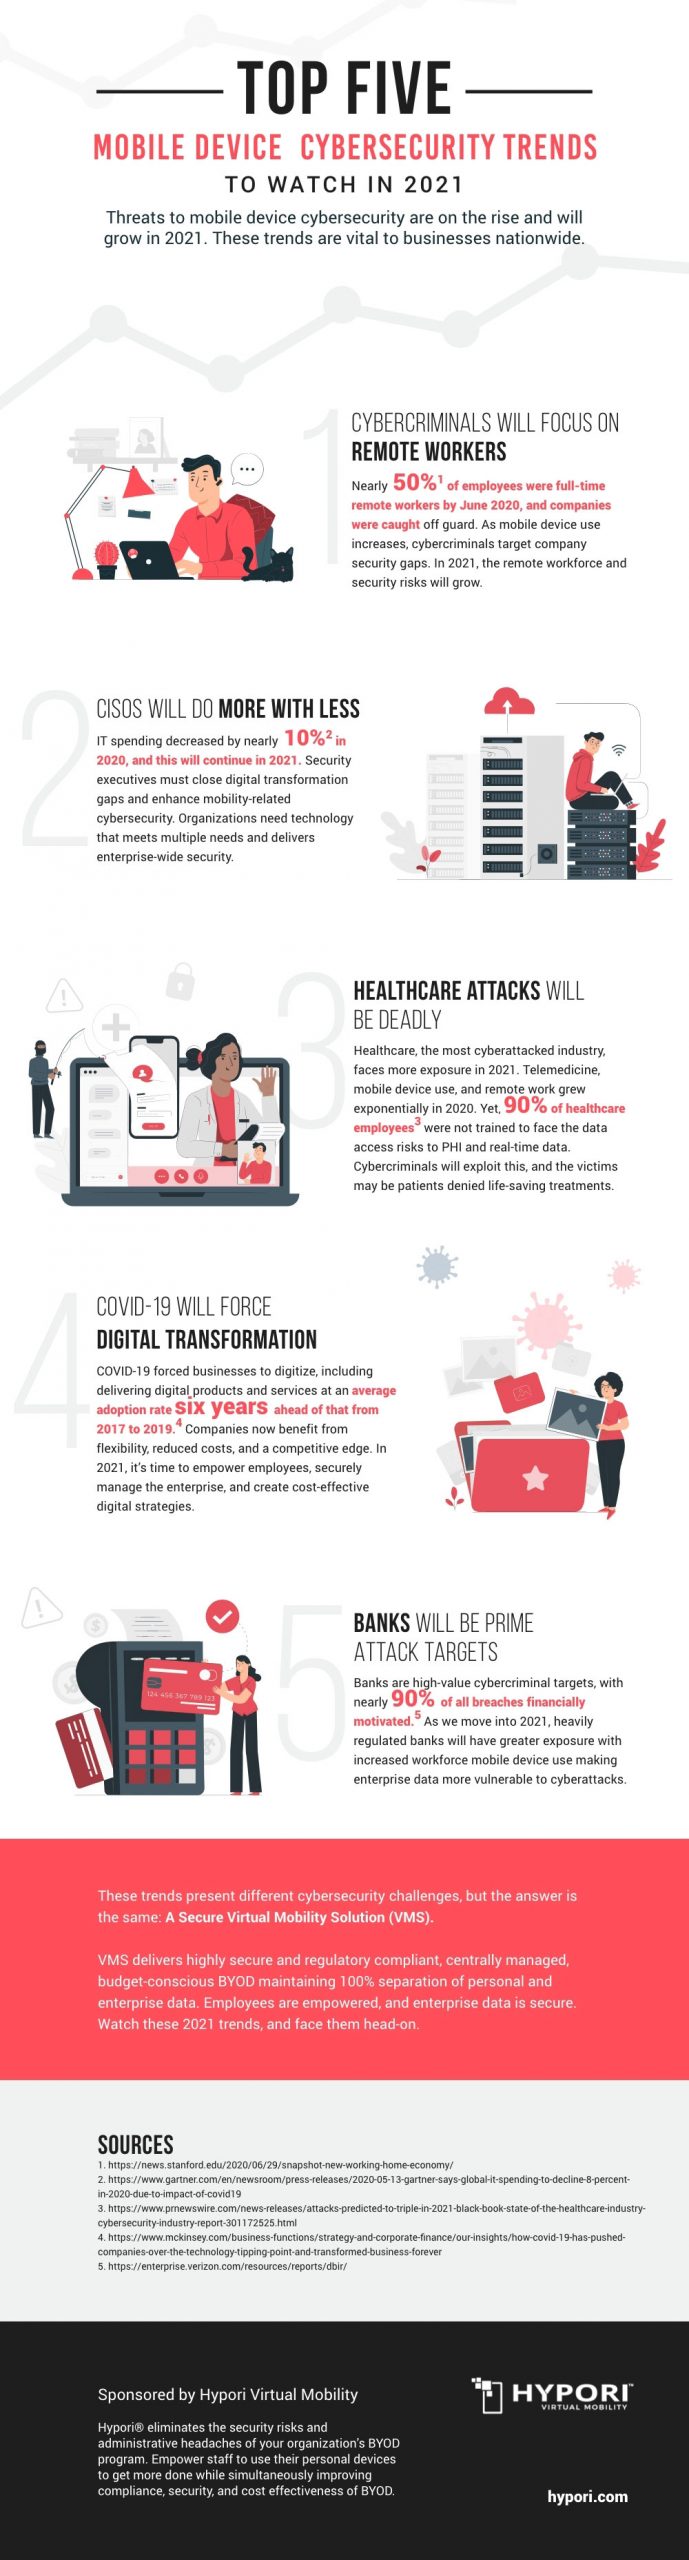 Top Five Mobile Device Cybersecurity Trends For 2021 Infographic Hypori 1000x3713px Web Scaled, Industry Today